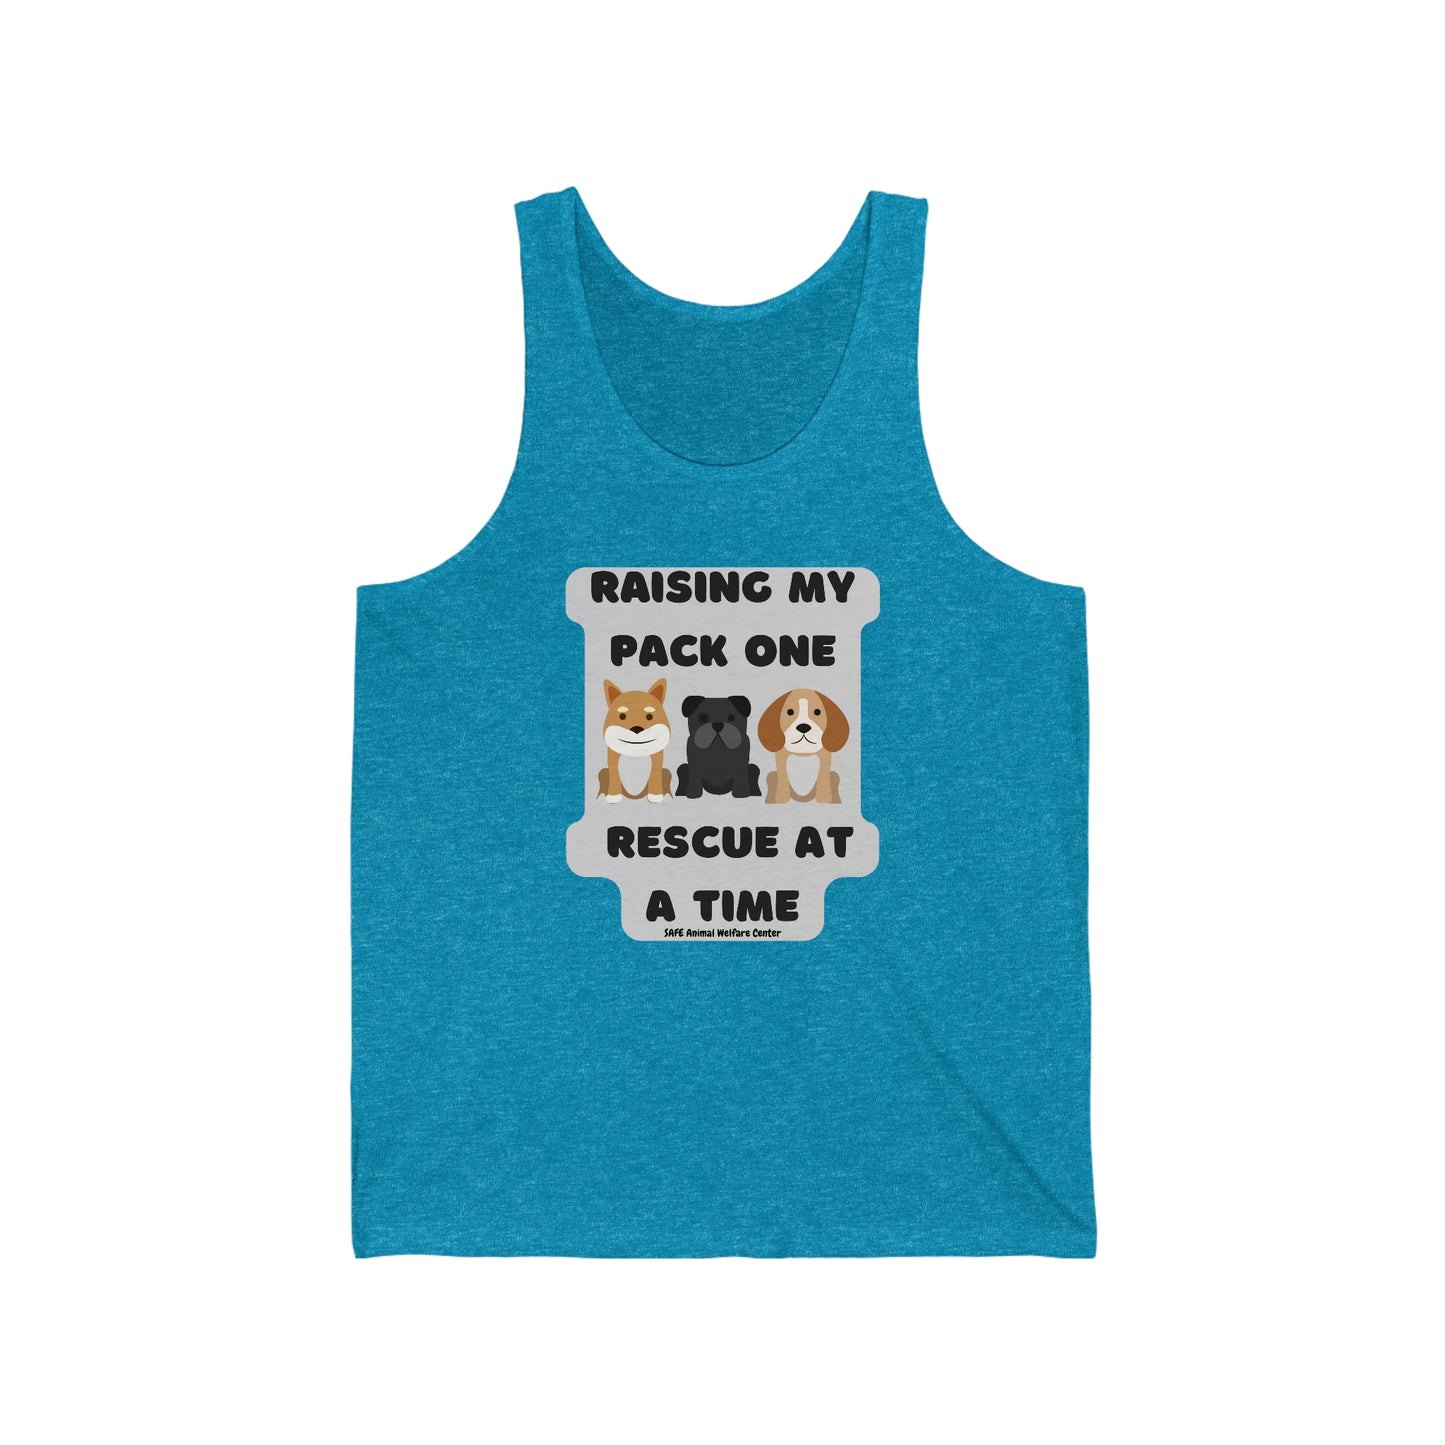 One Rescue At A Time Unisex Jersey Tank